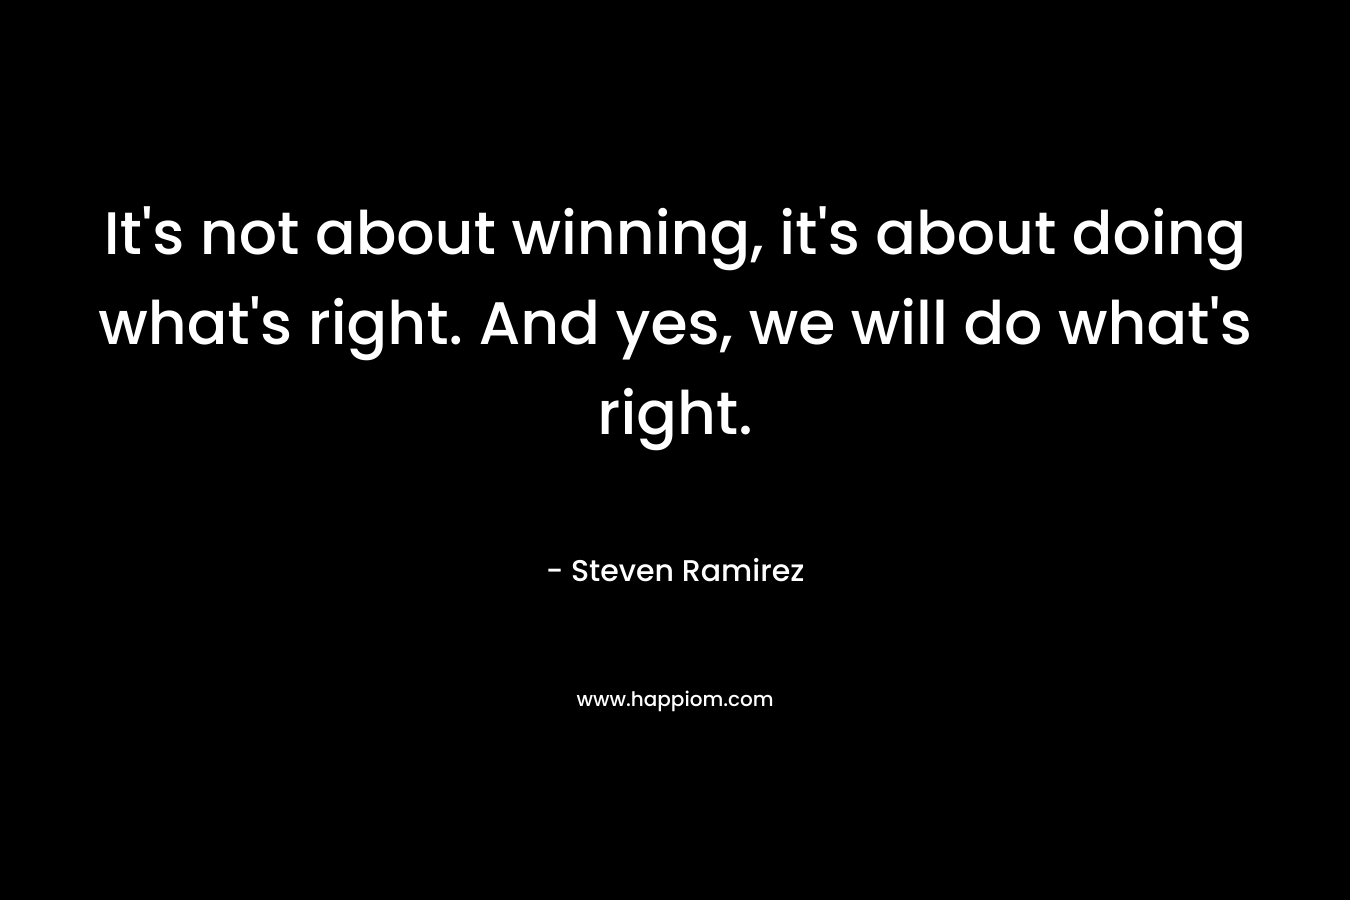 It's not about winning, it's about doing what's right. And yes, we will do what's right.